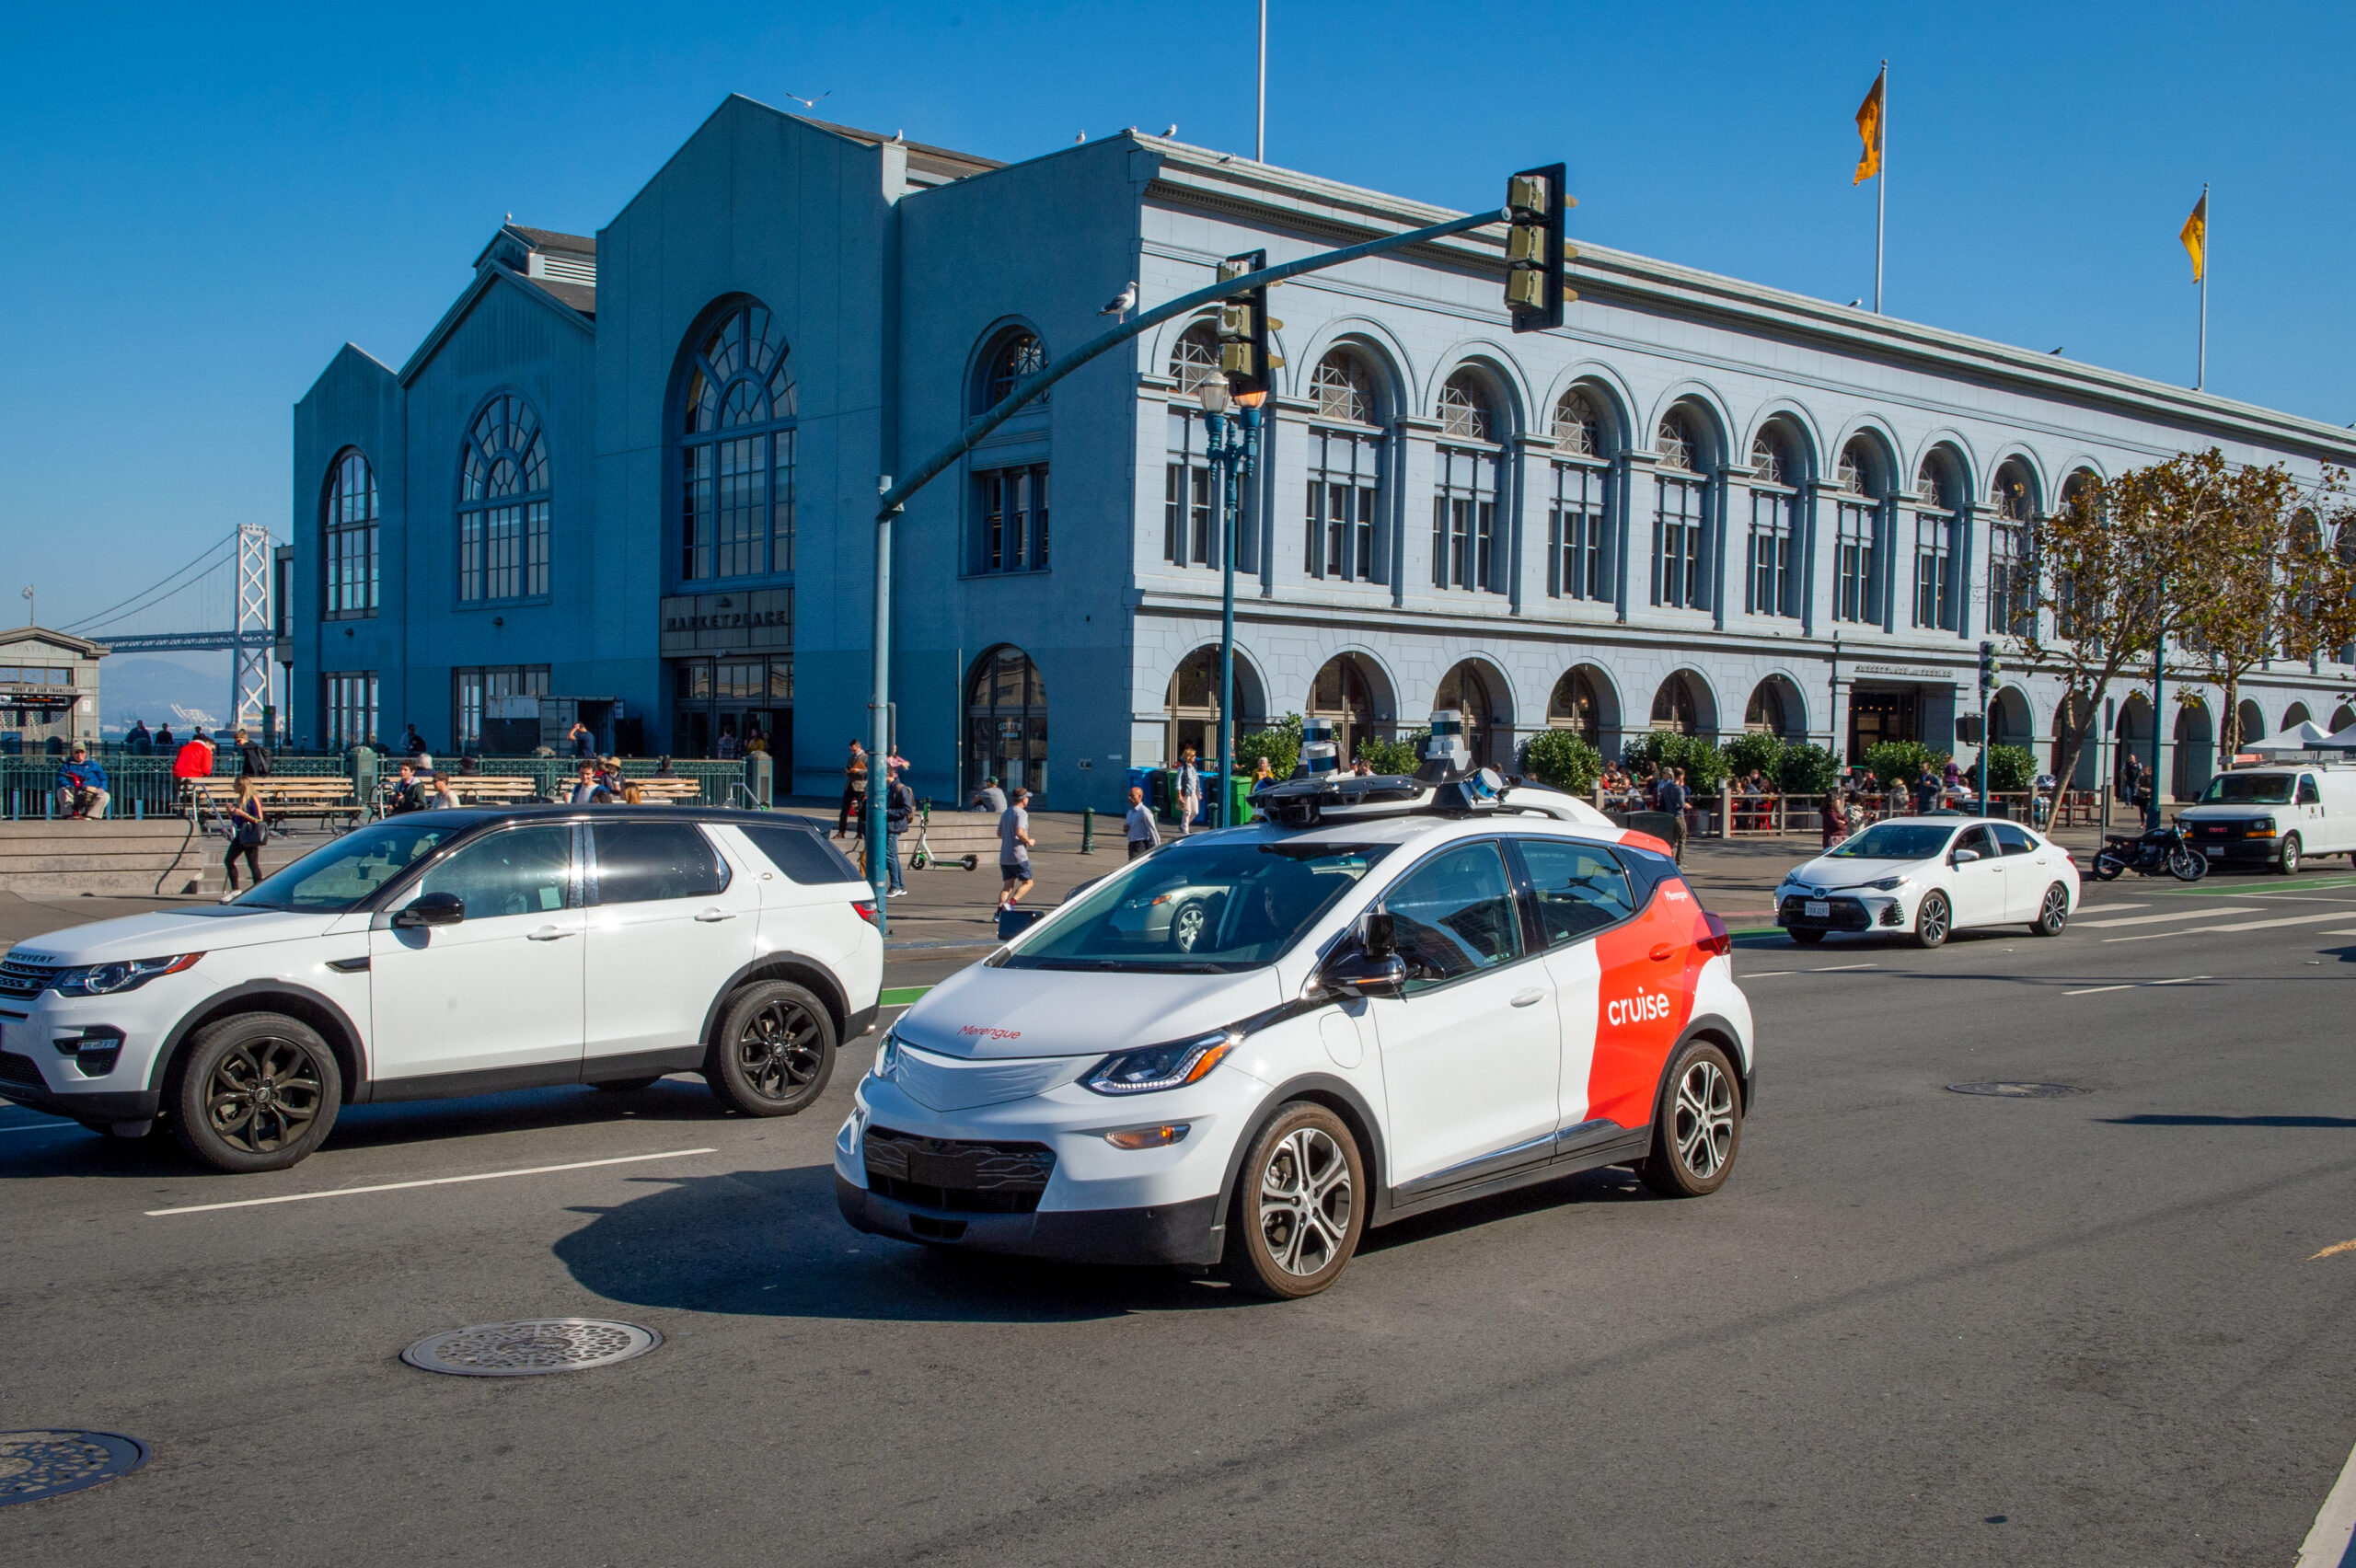 It’s Finally Here: Real Driverless Cruise Cars Spotted Picking Up Passengers Around the City